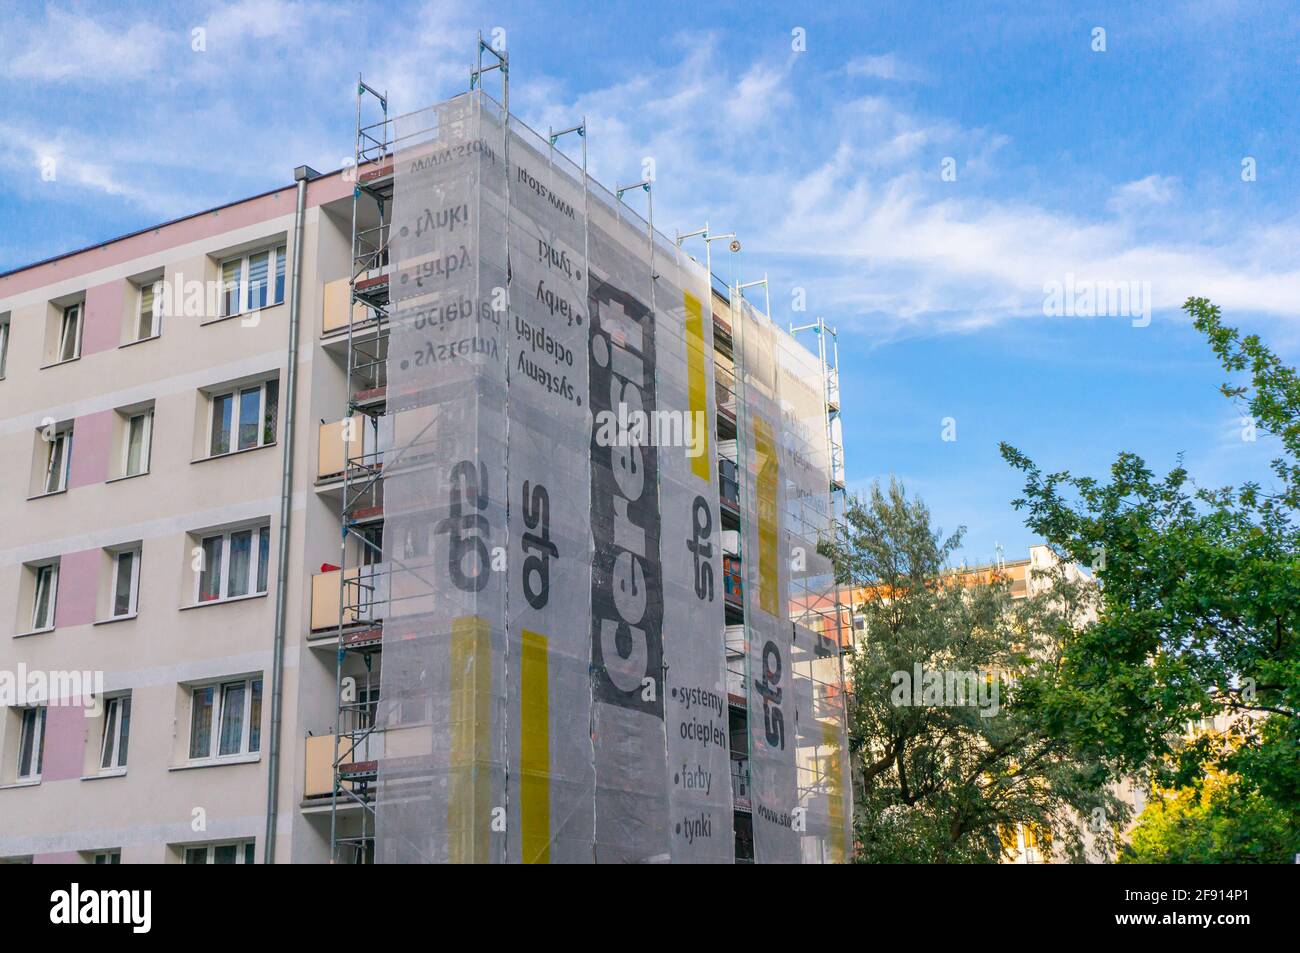 POZNAN, POLAND - Oct 19, 2015: Apartment building under renovation with Ceresit advertisement at the Osiedle Piastowskie area Stock Photo